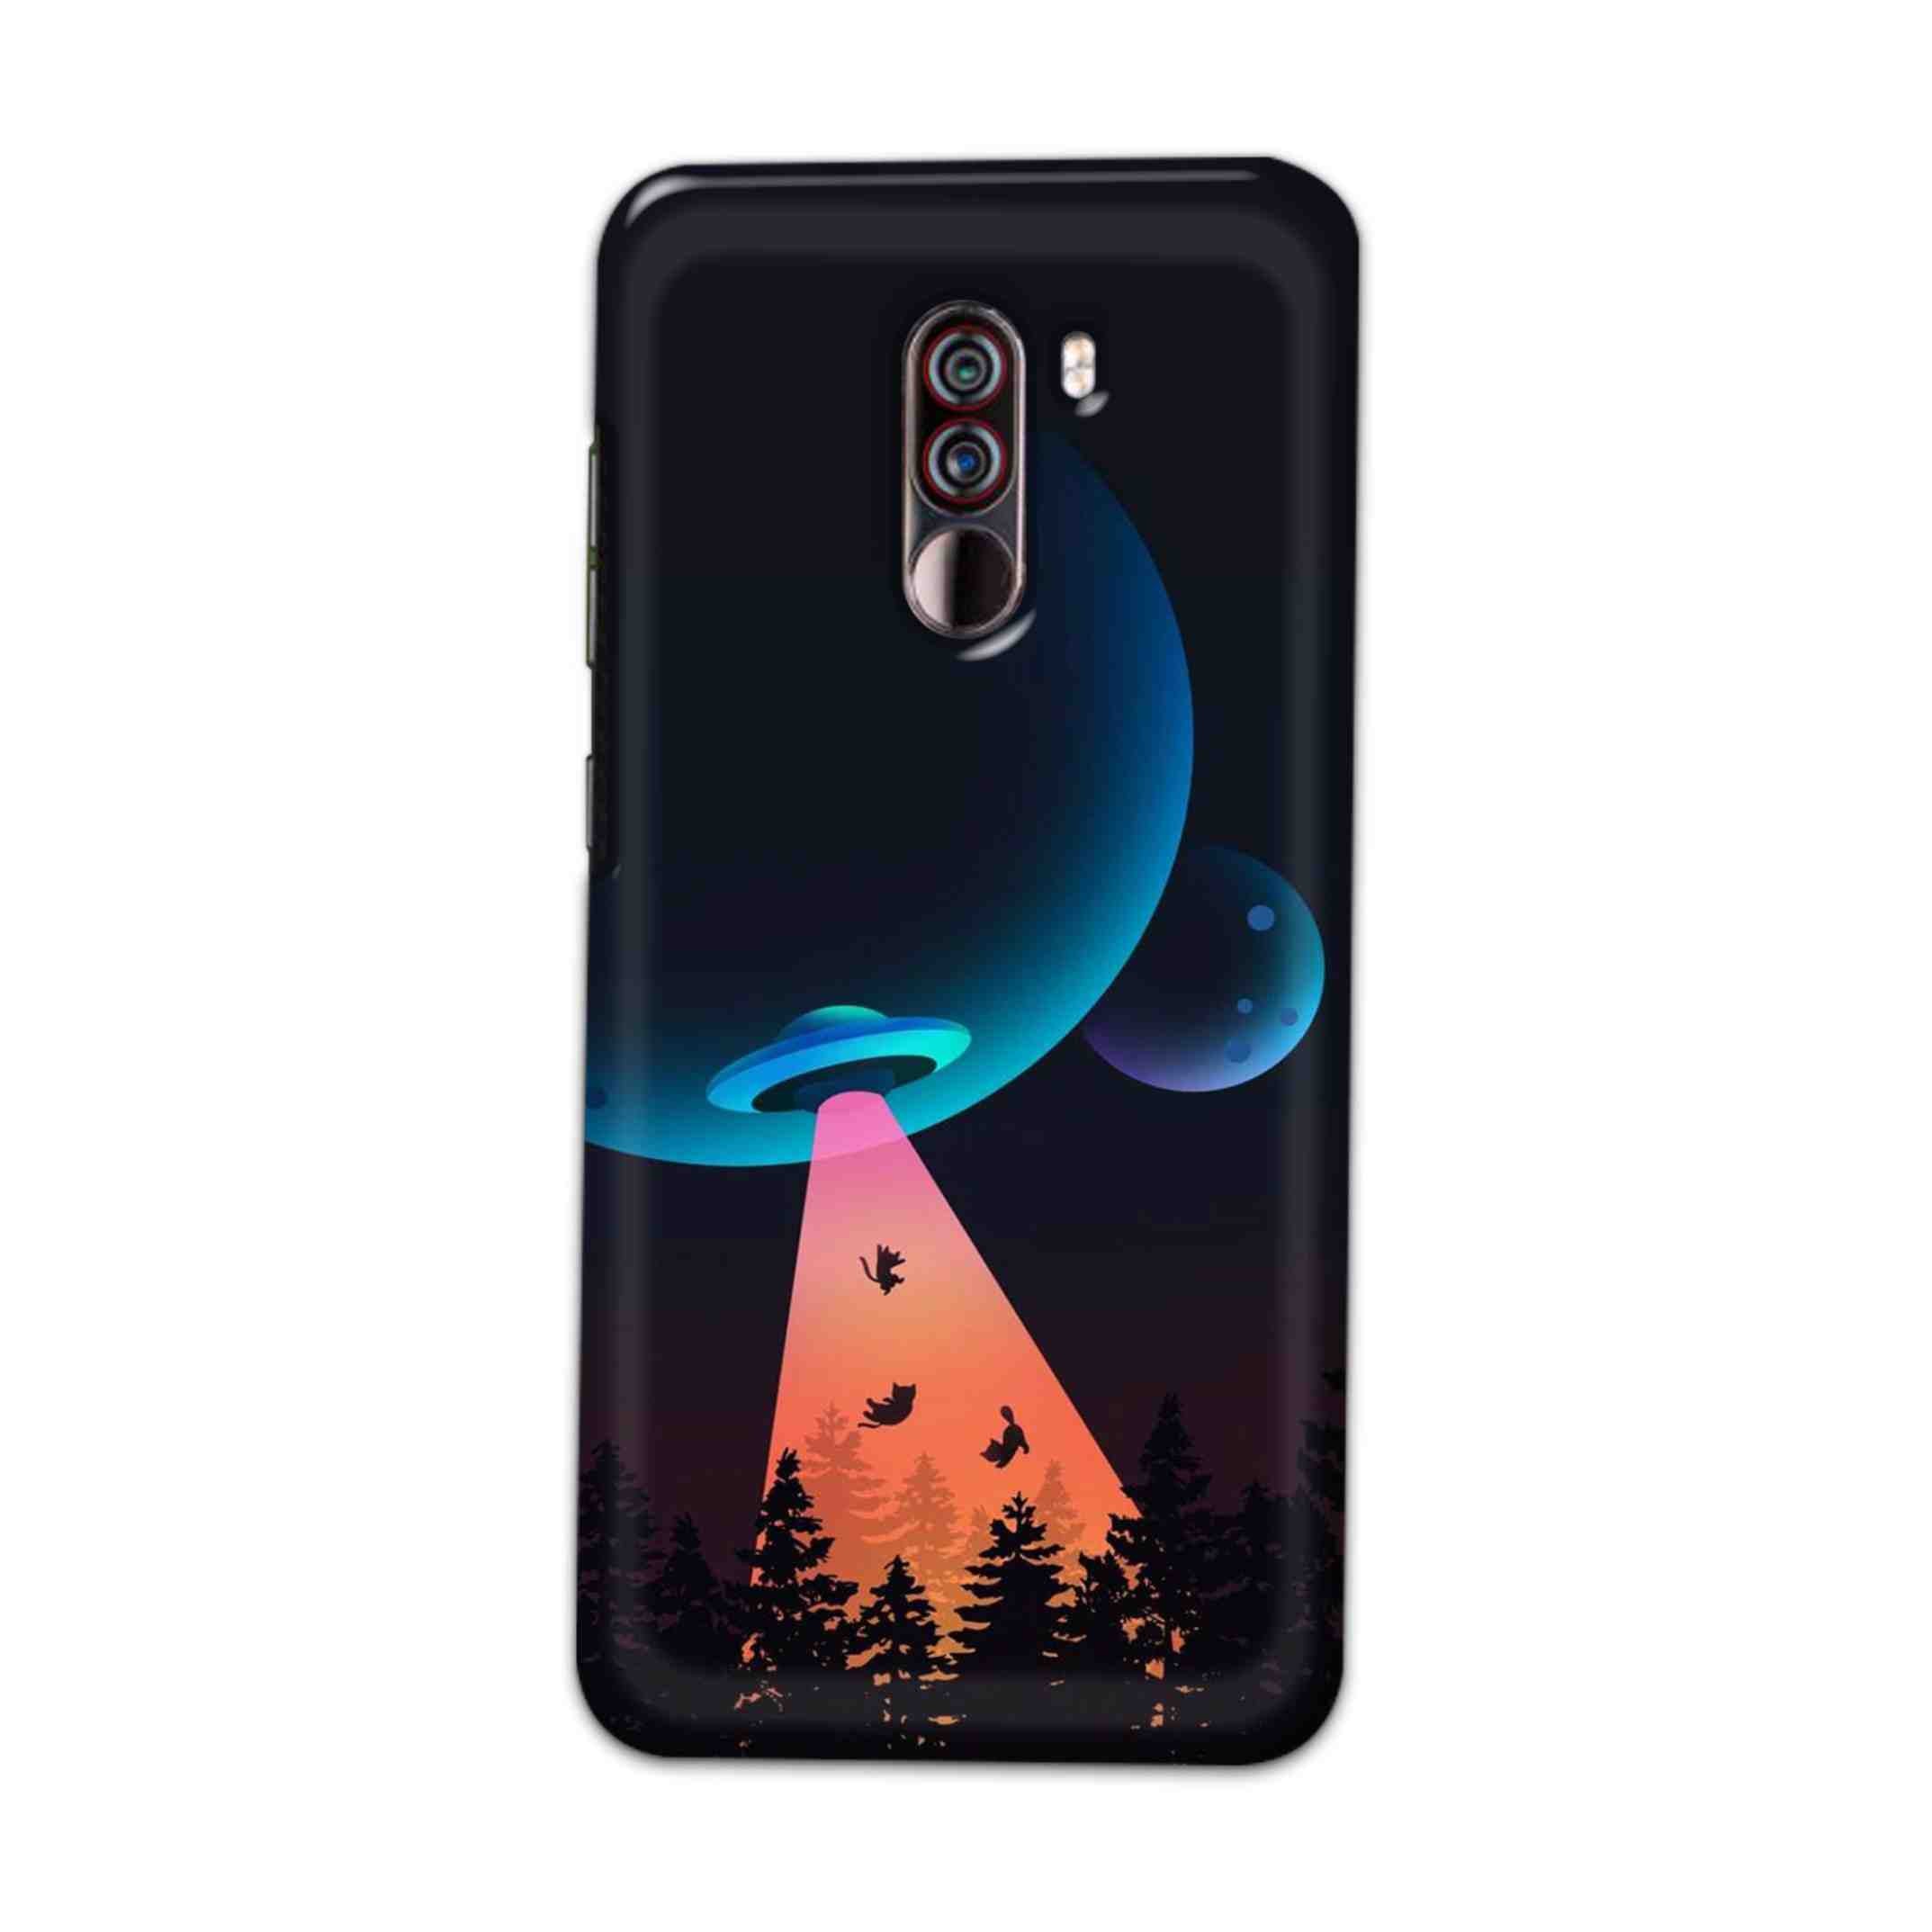 Buy Spaceship Hard Back Mobile Phone Case Cover For Xiaomi Pocophone F1 Online